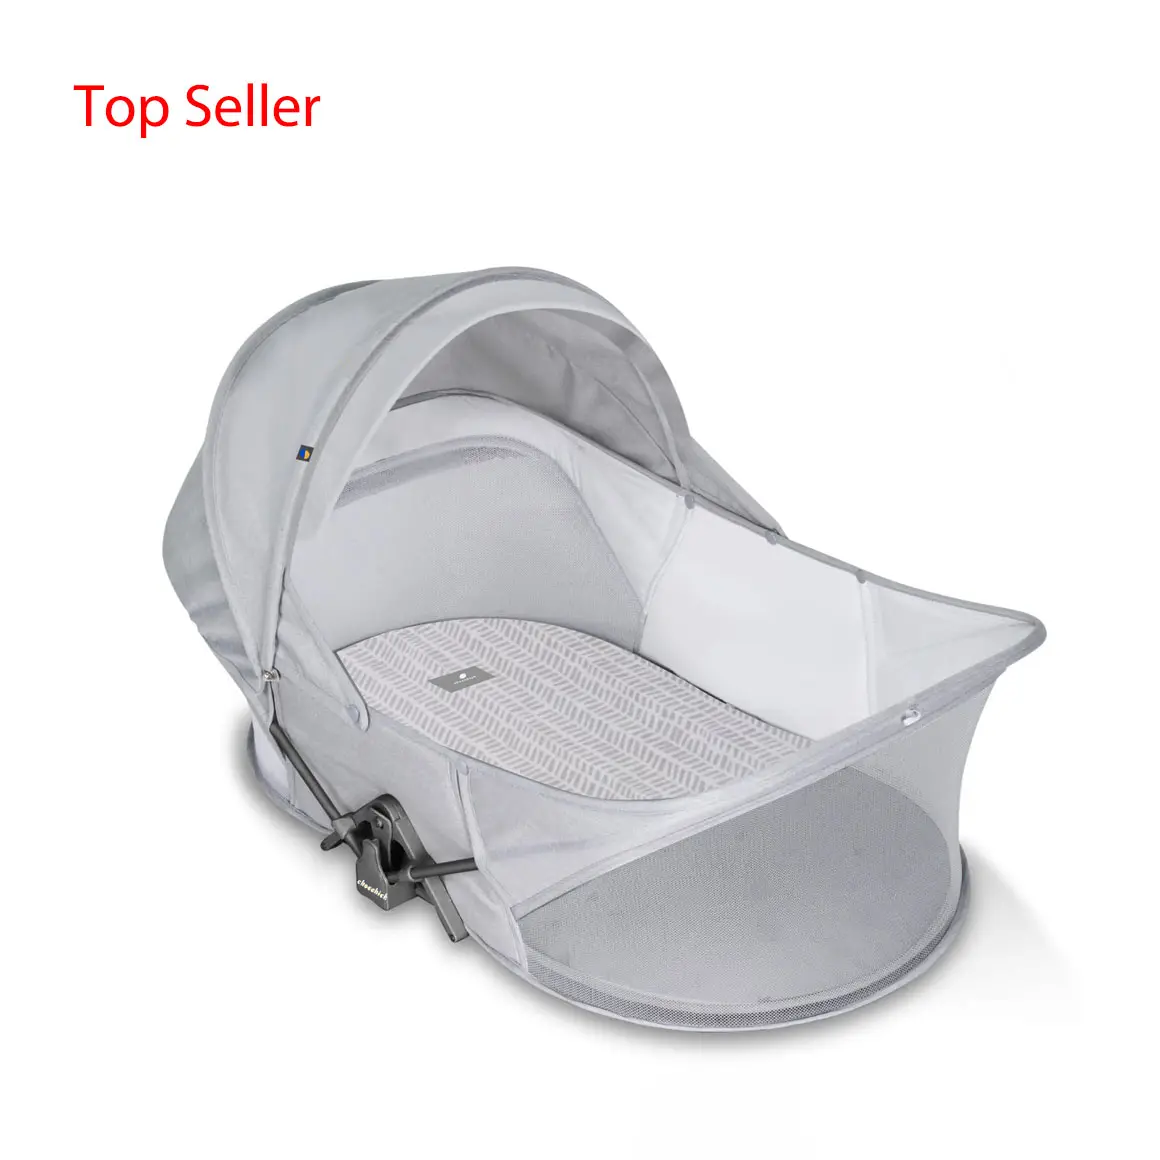 Top Seller Portable Travel Home Outdoor Foldable Snuggle Lounger Bed Baby Crib Nest